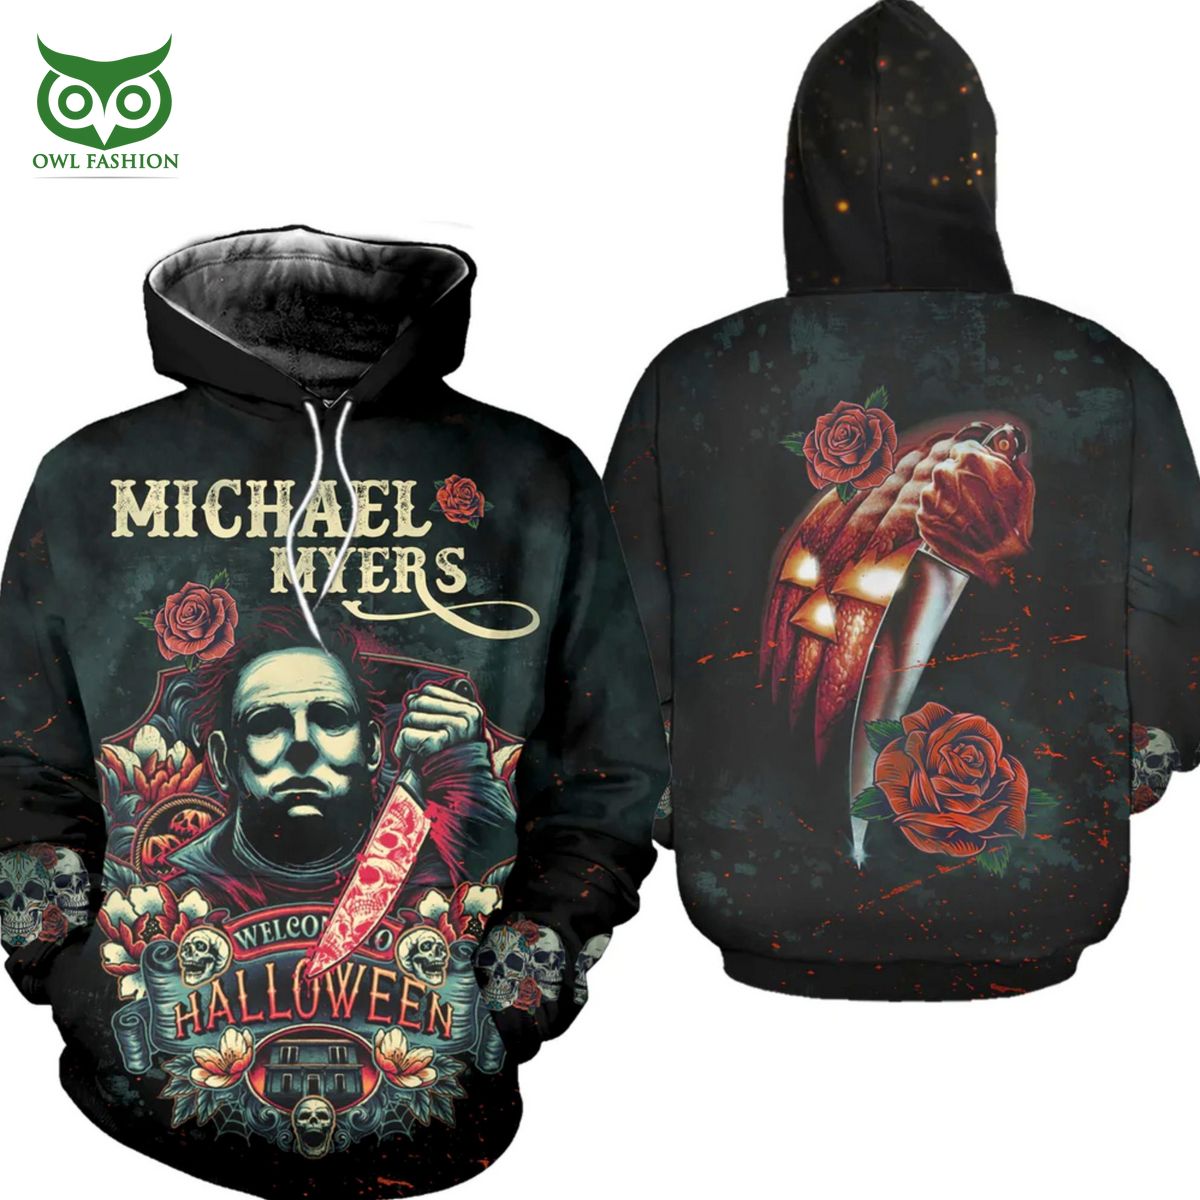 michael myers and roses halloween horror movie 3d hoodie 1 Fjvwf